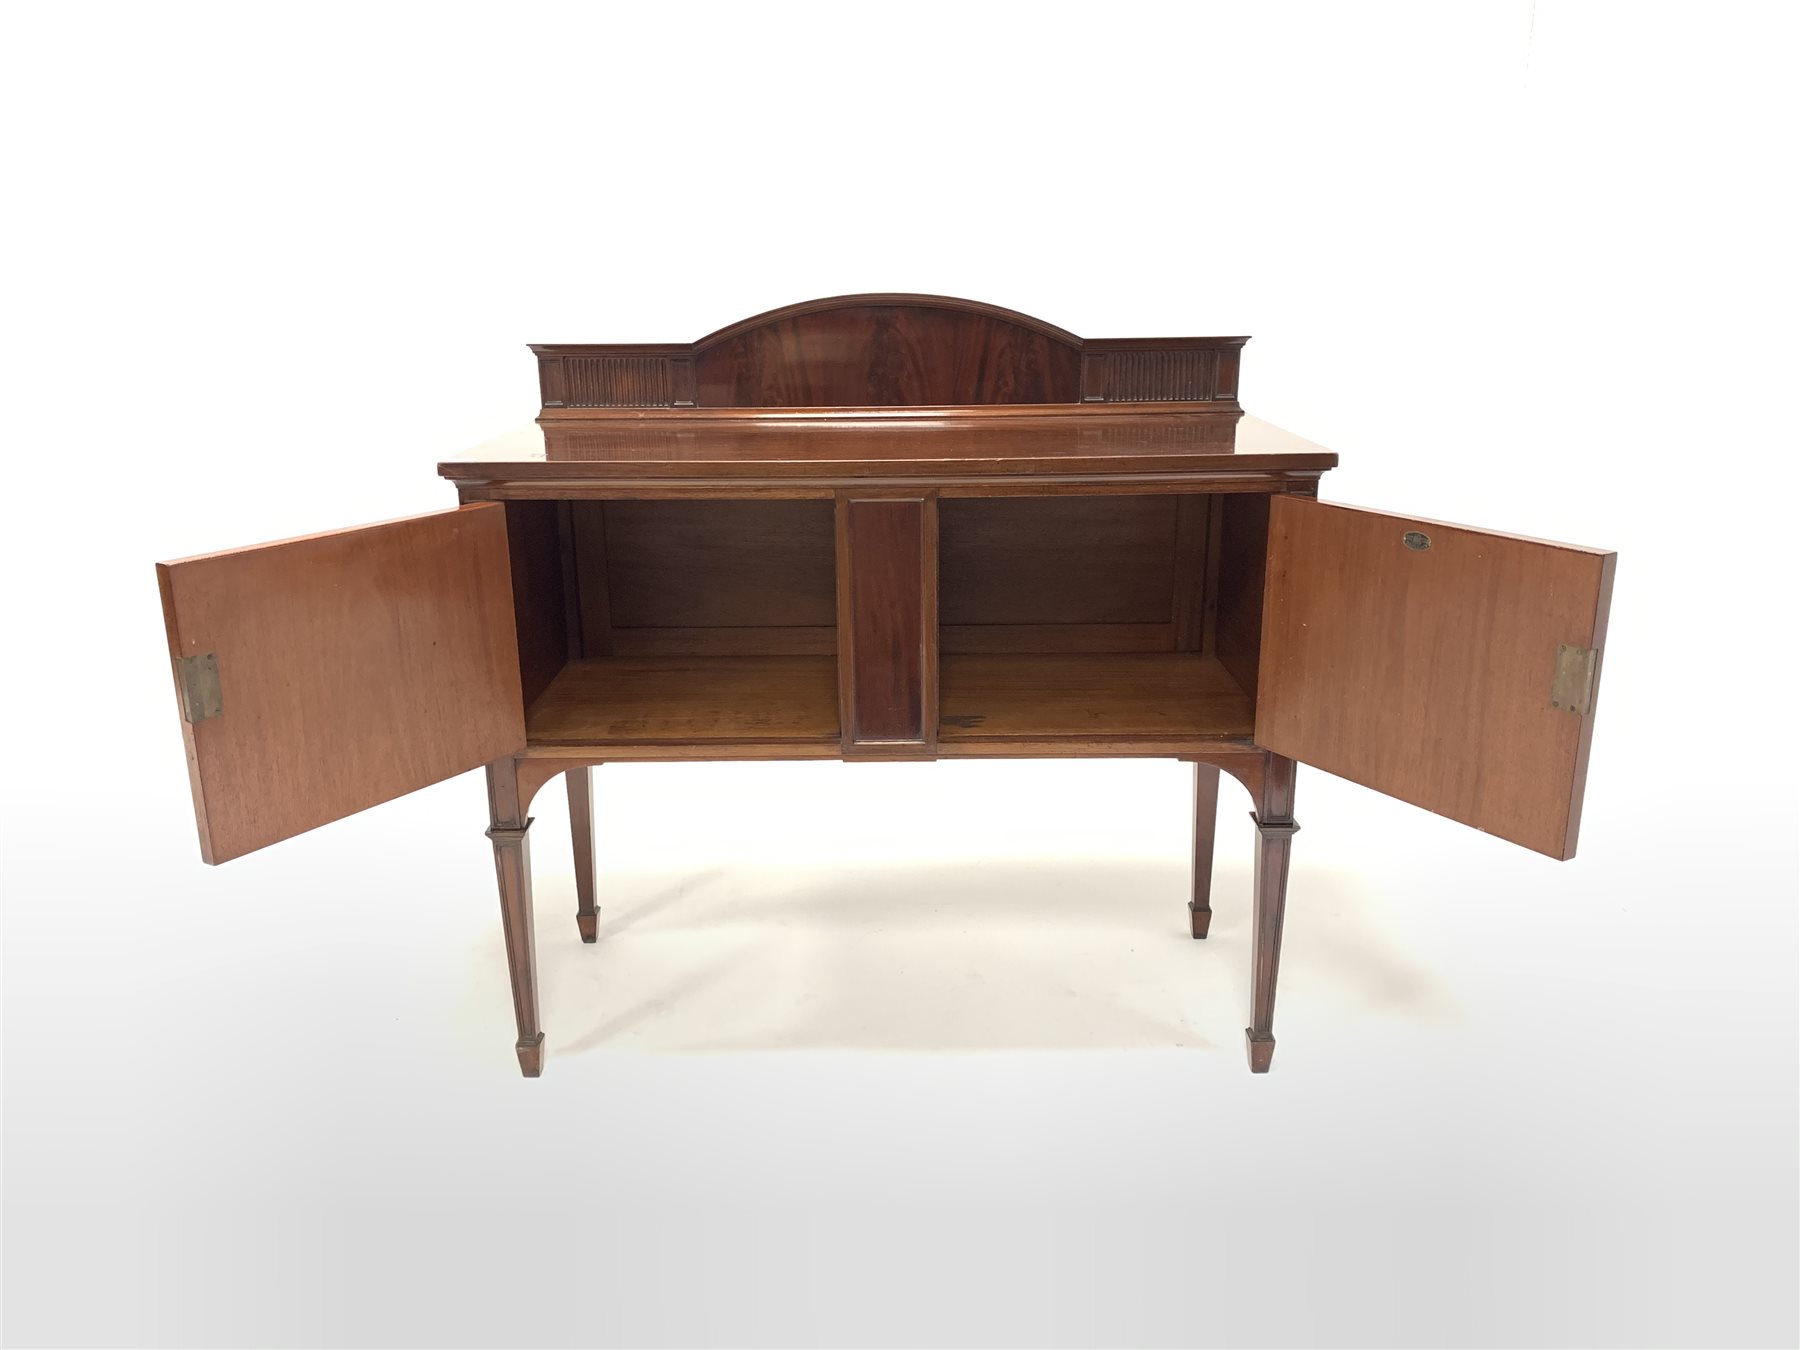 Georgian design mahogany sideboard, raised arched back with fluted decoration over two cupboards, ra - Image 3 of 4